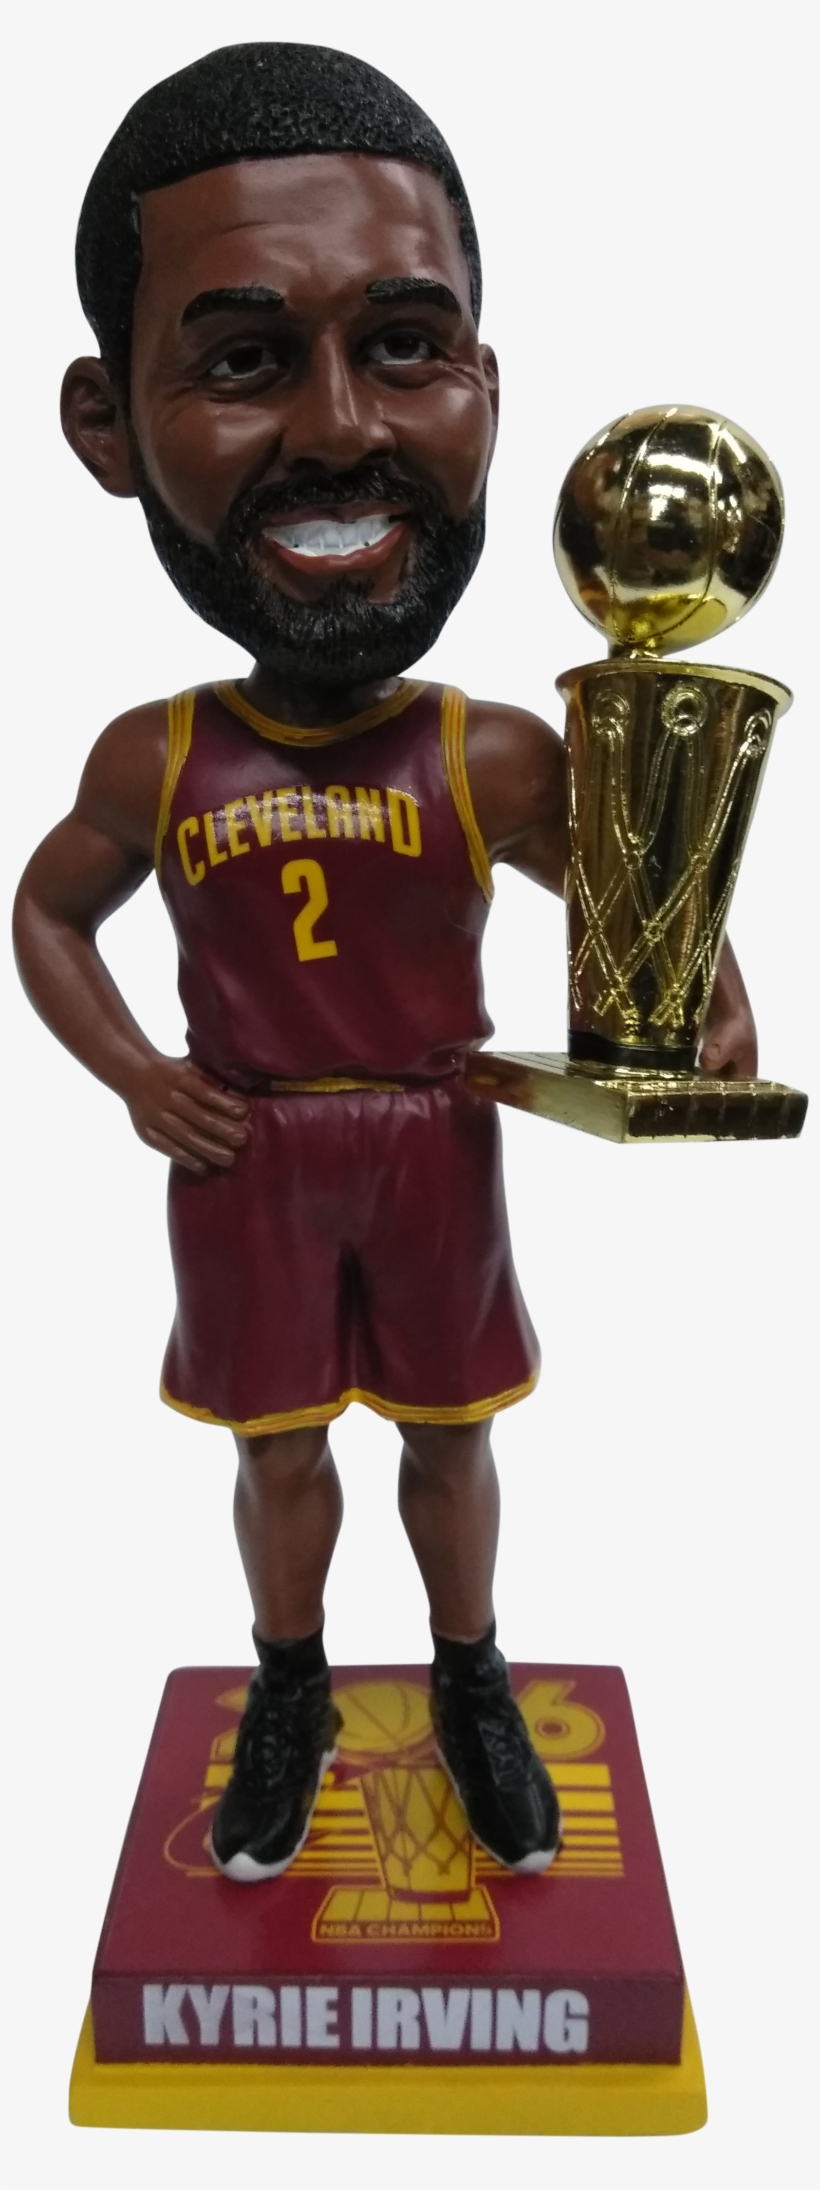 Kyrie Irving Cleveland Cavaliers Wine Jersey 2016 Nba - Forever Collectibles Kyrie Irving Cleveland Cavaliers, transparent png #254627